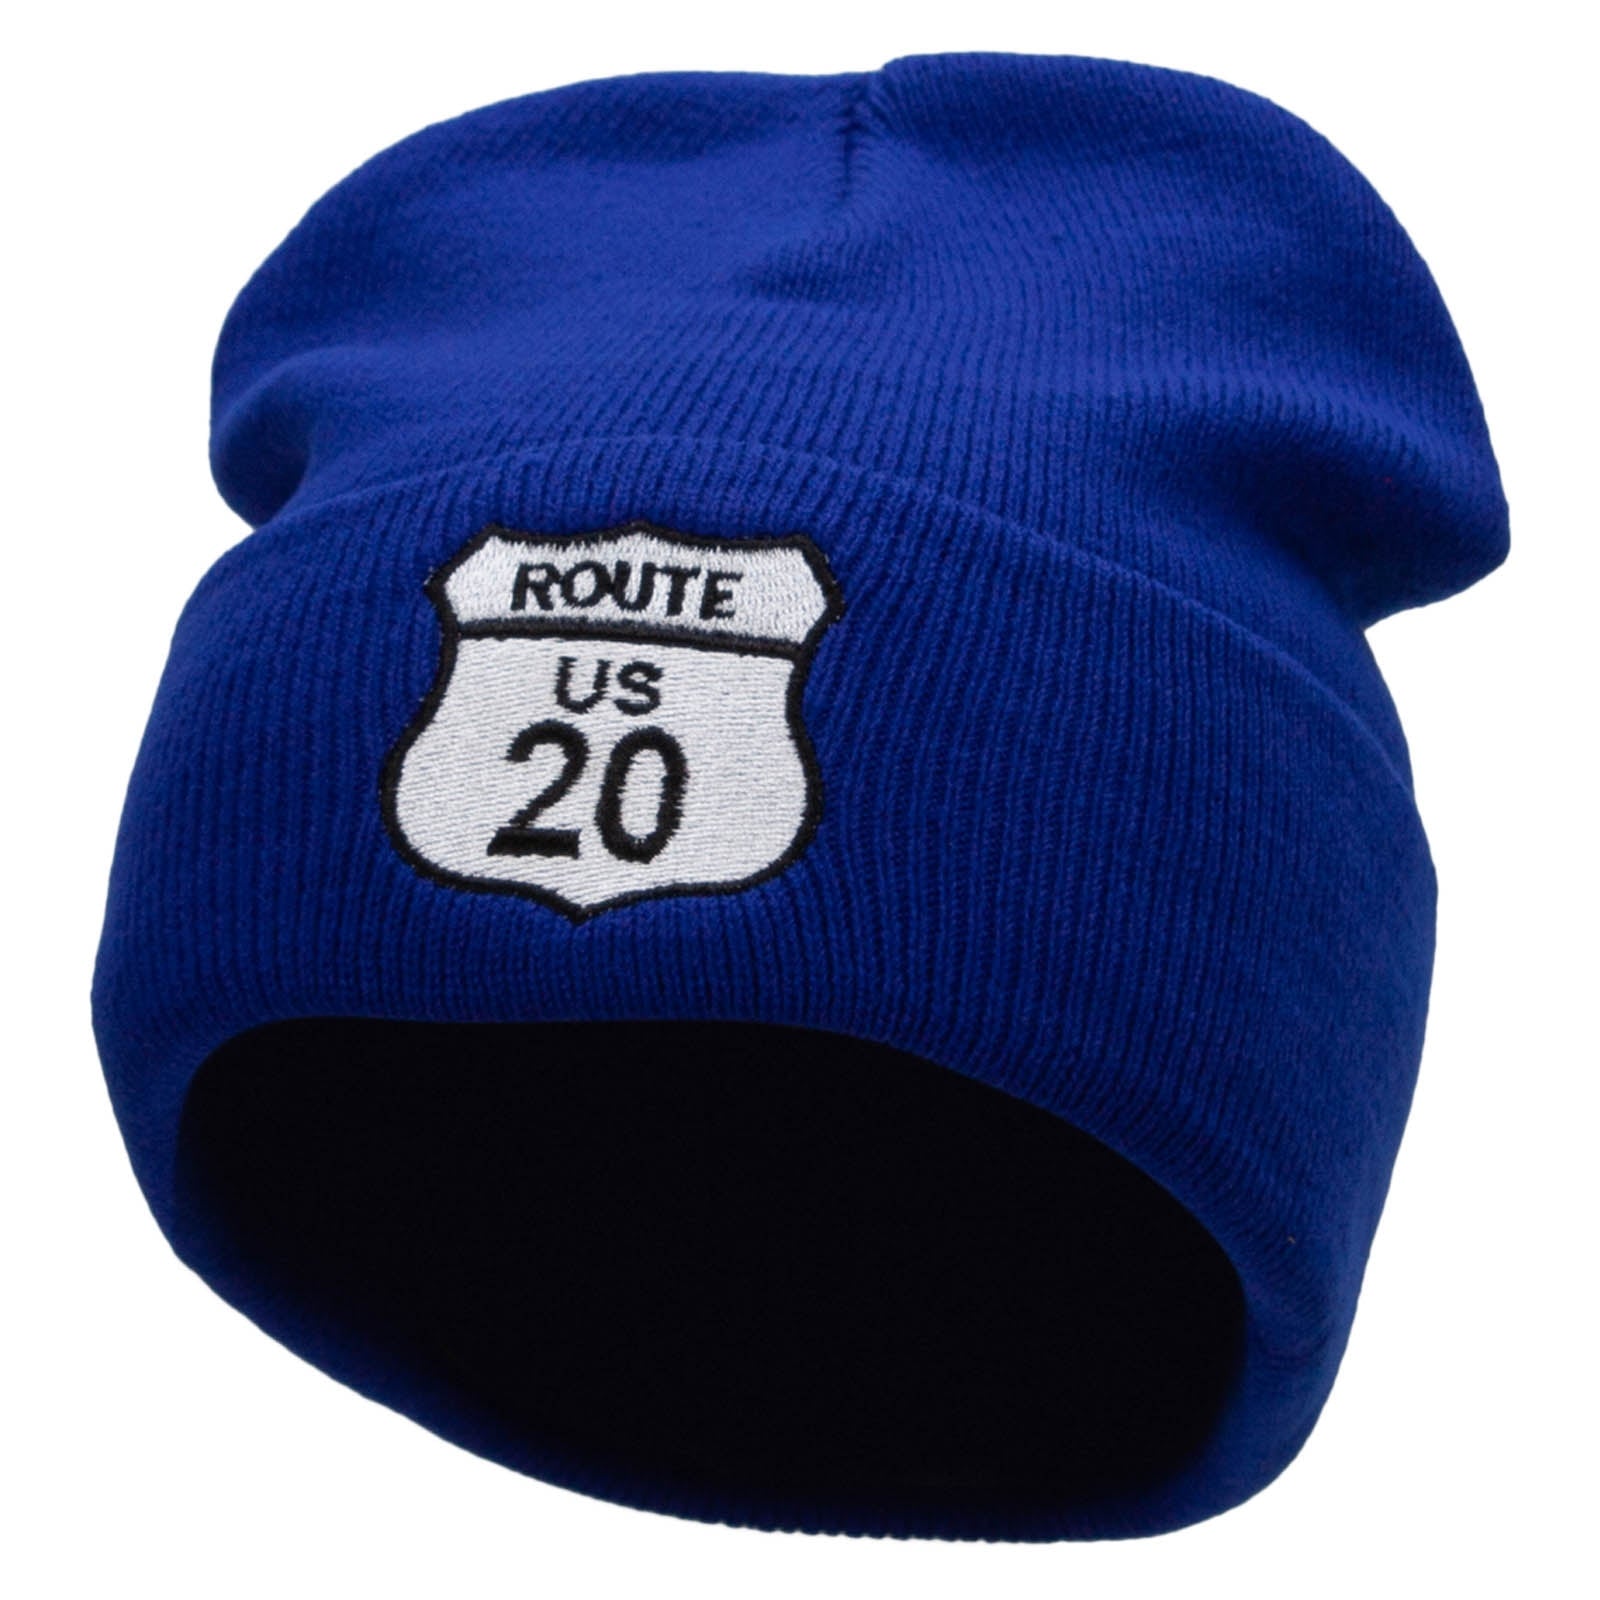 Route US 20 Embroidered 12 Inch Long Knitted Beanie - Royal OSFM